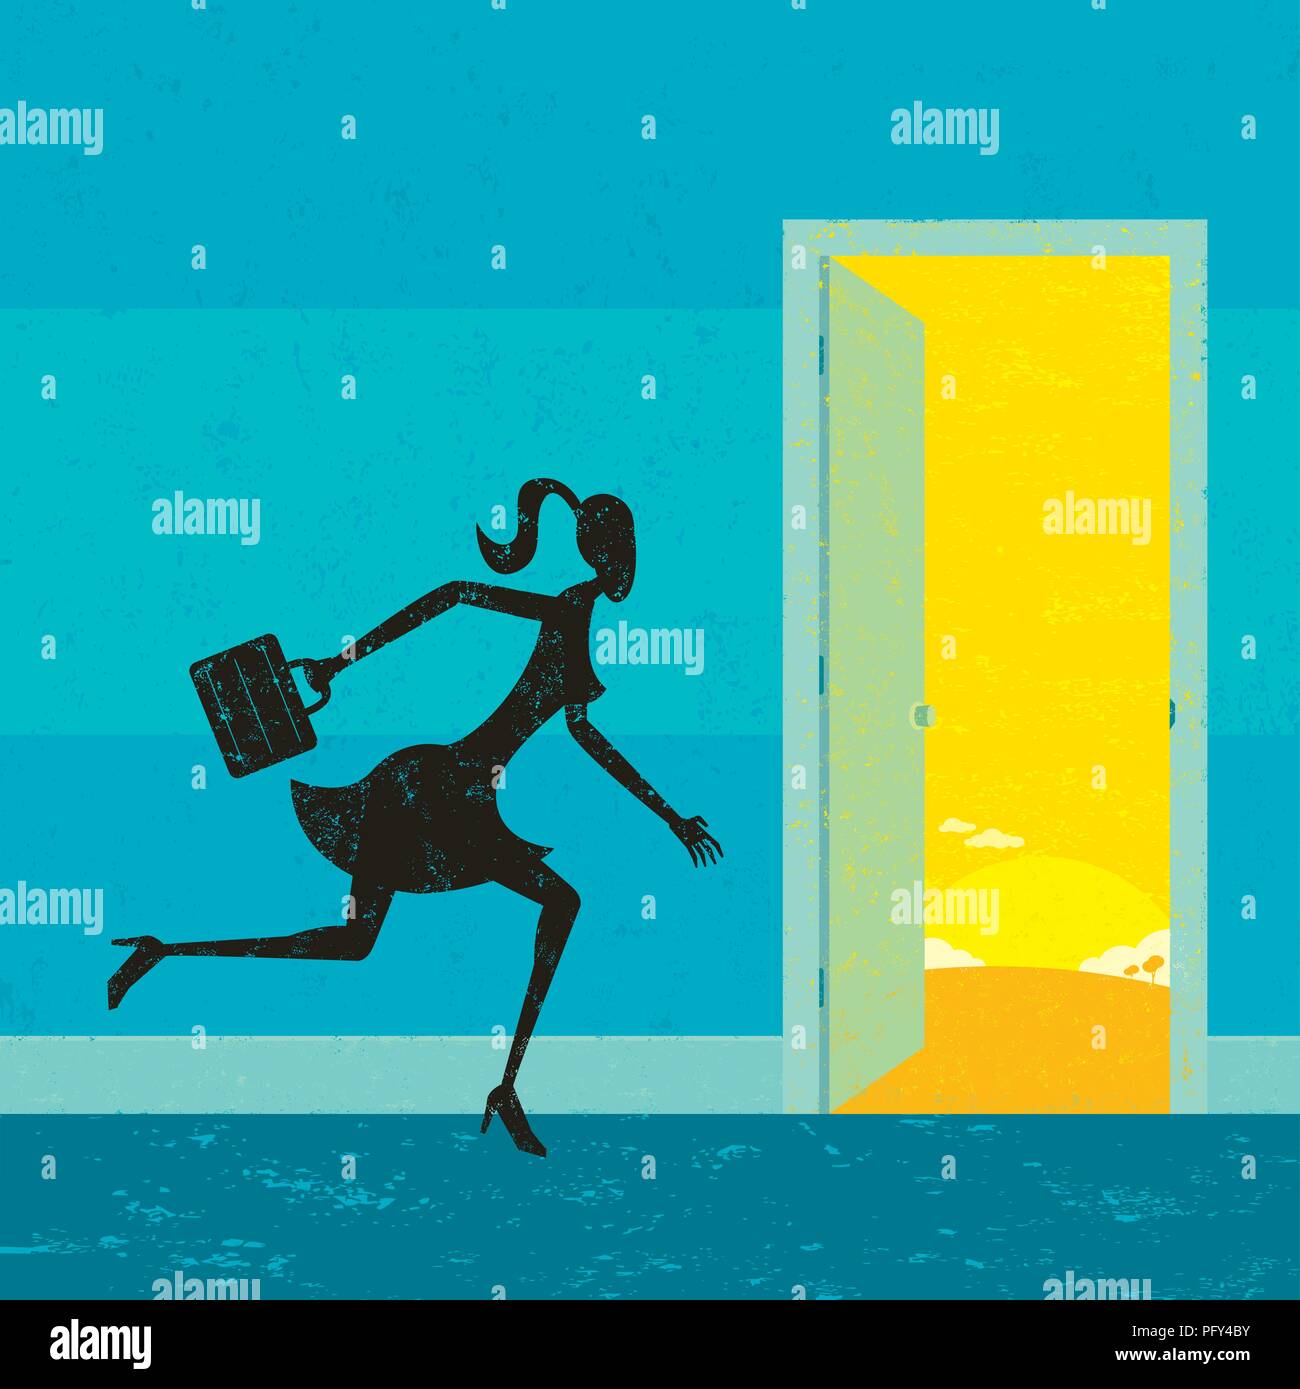 Finding New Opportunities. A businesswoman heading through a door to new opportunities. Stock Vector